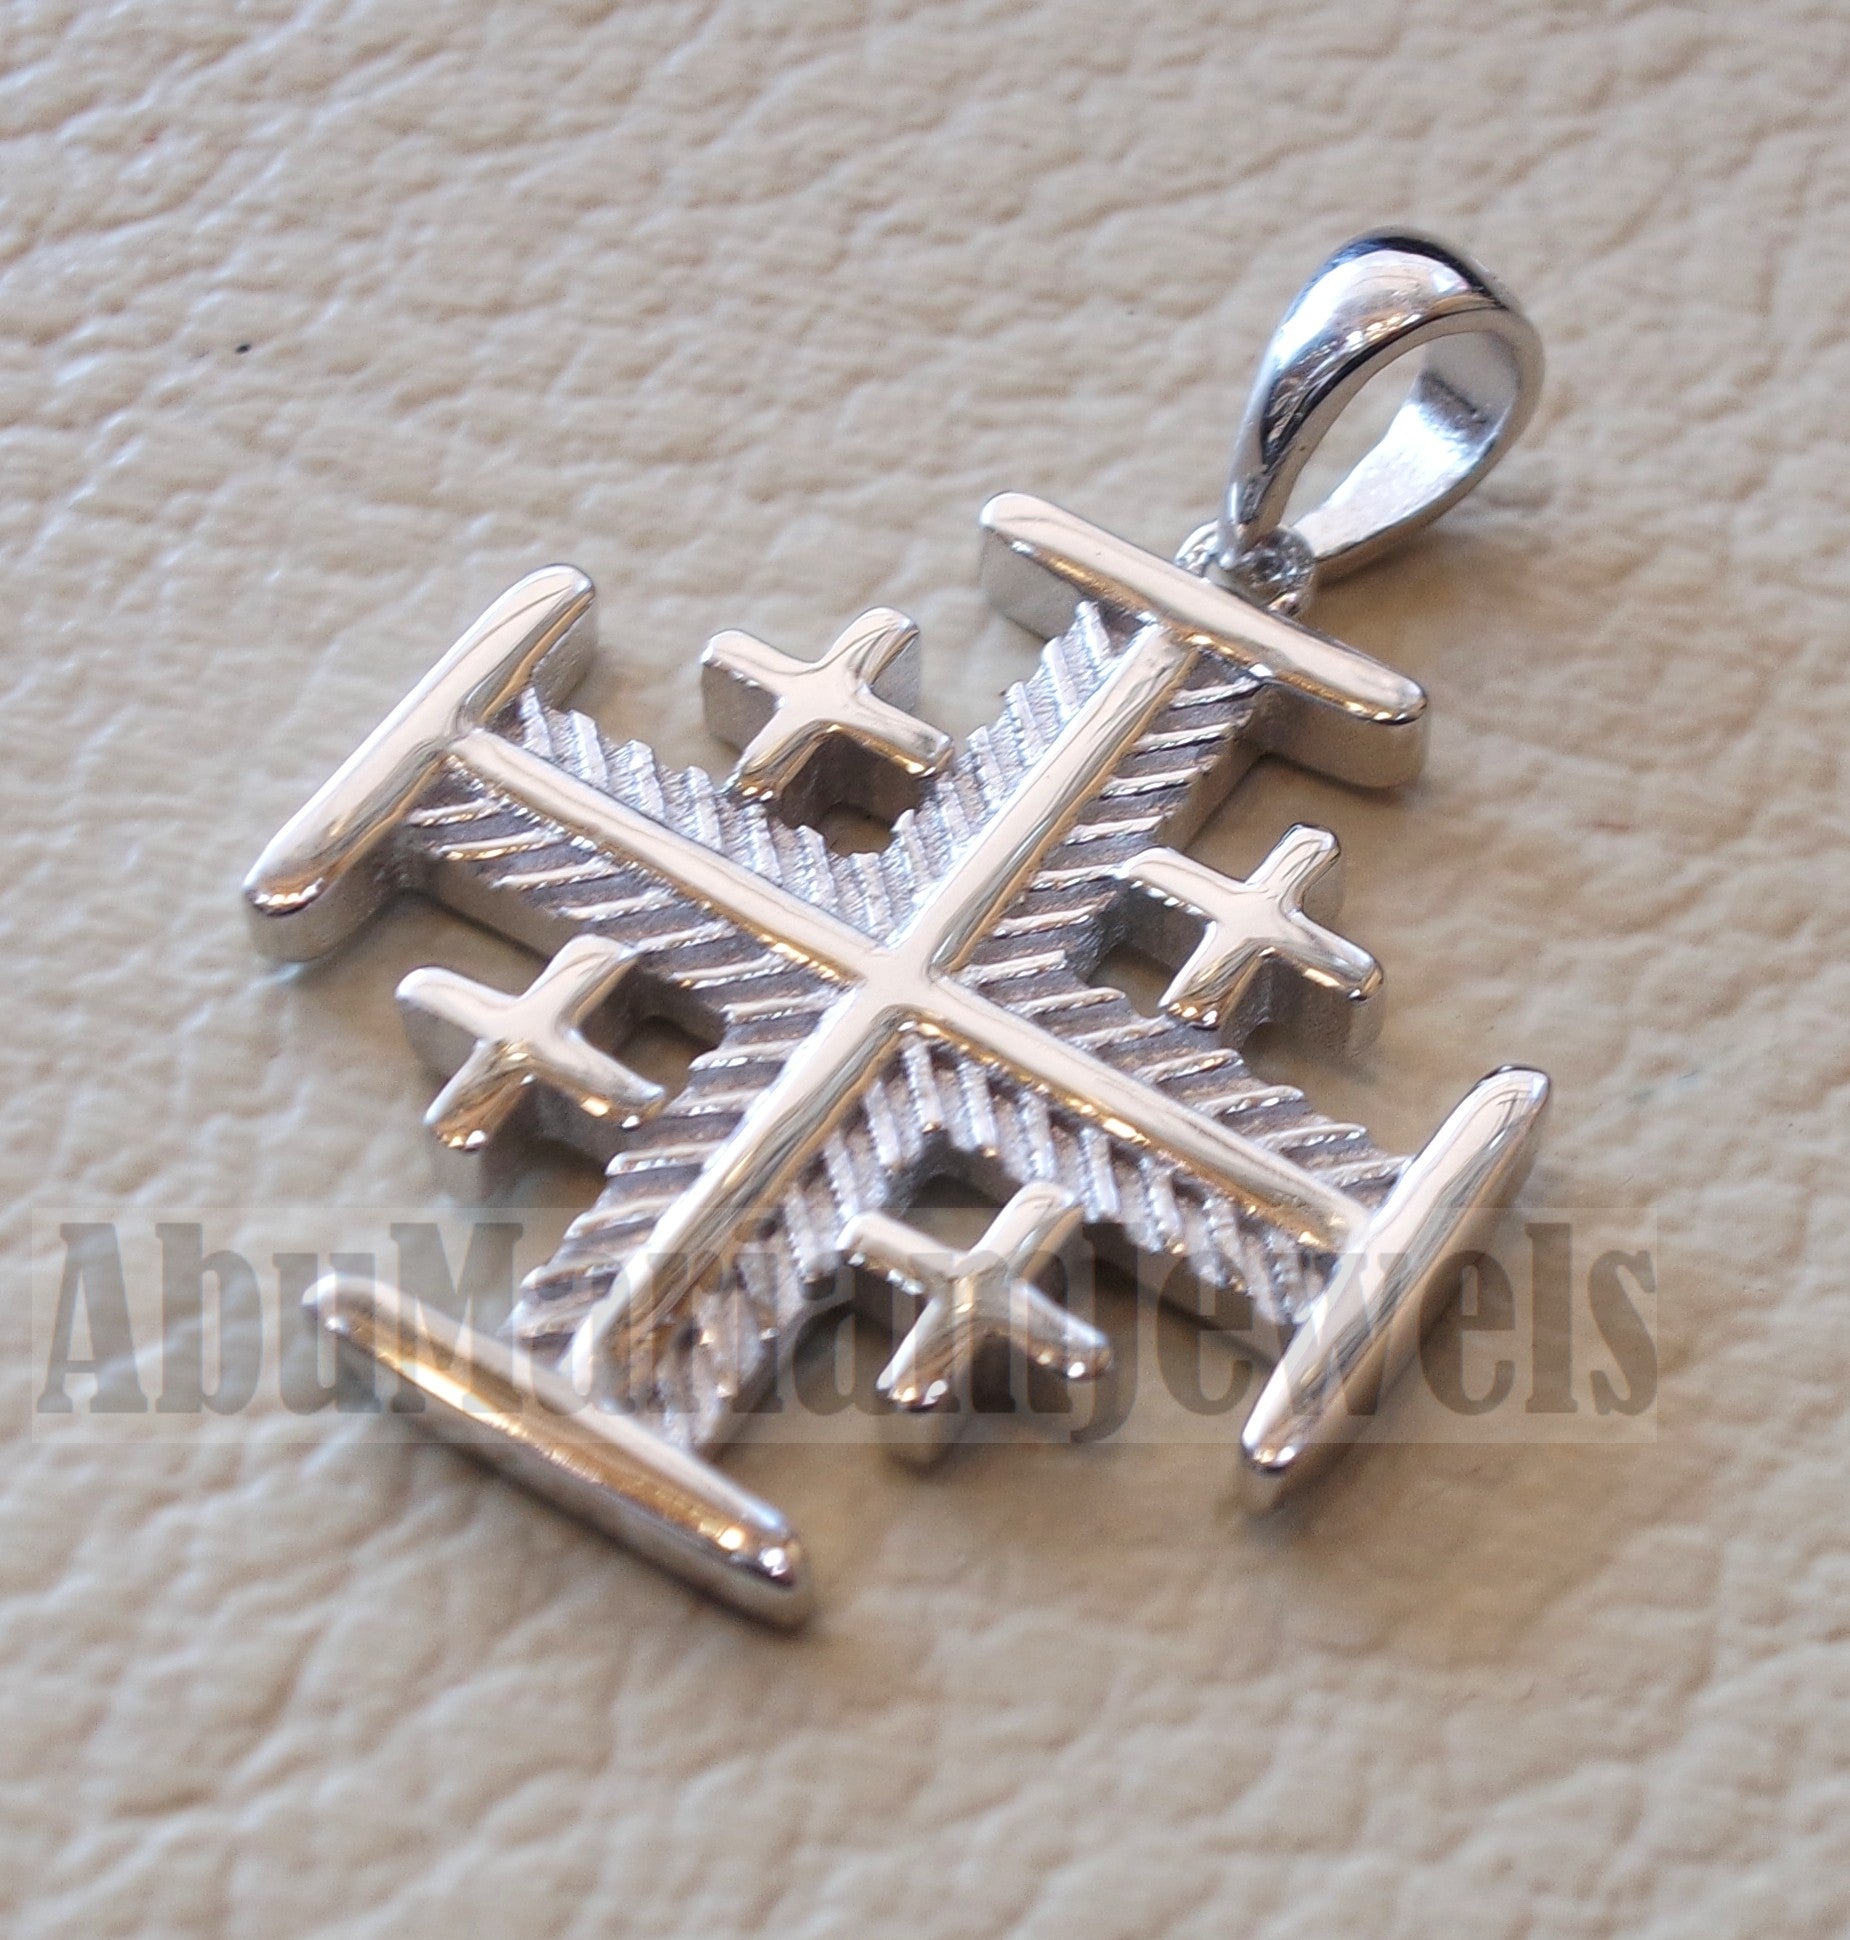 Jerusalem cross pendant sterling silver 925 middle eastern jewelry christianity vintage handmade heavy express shipping